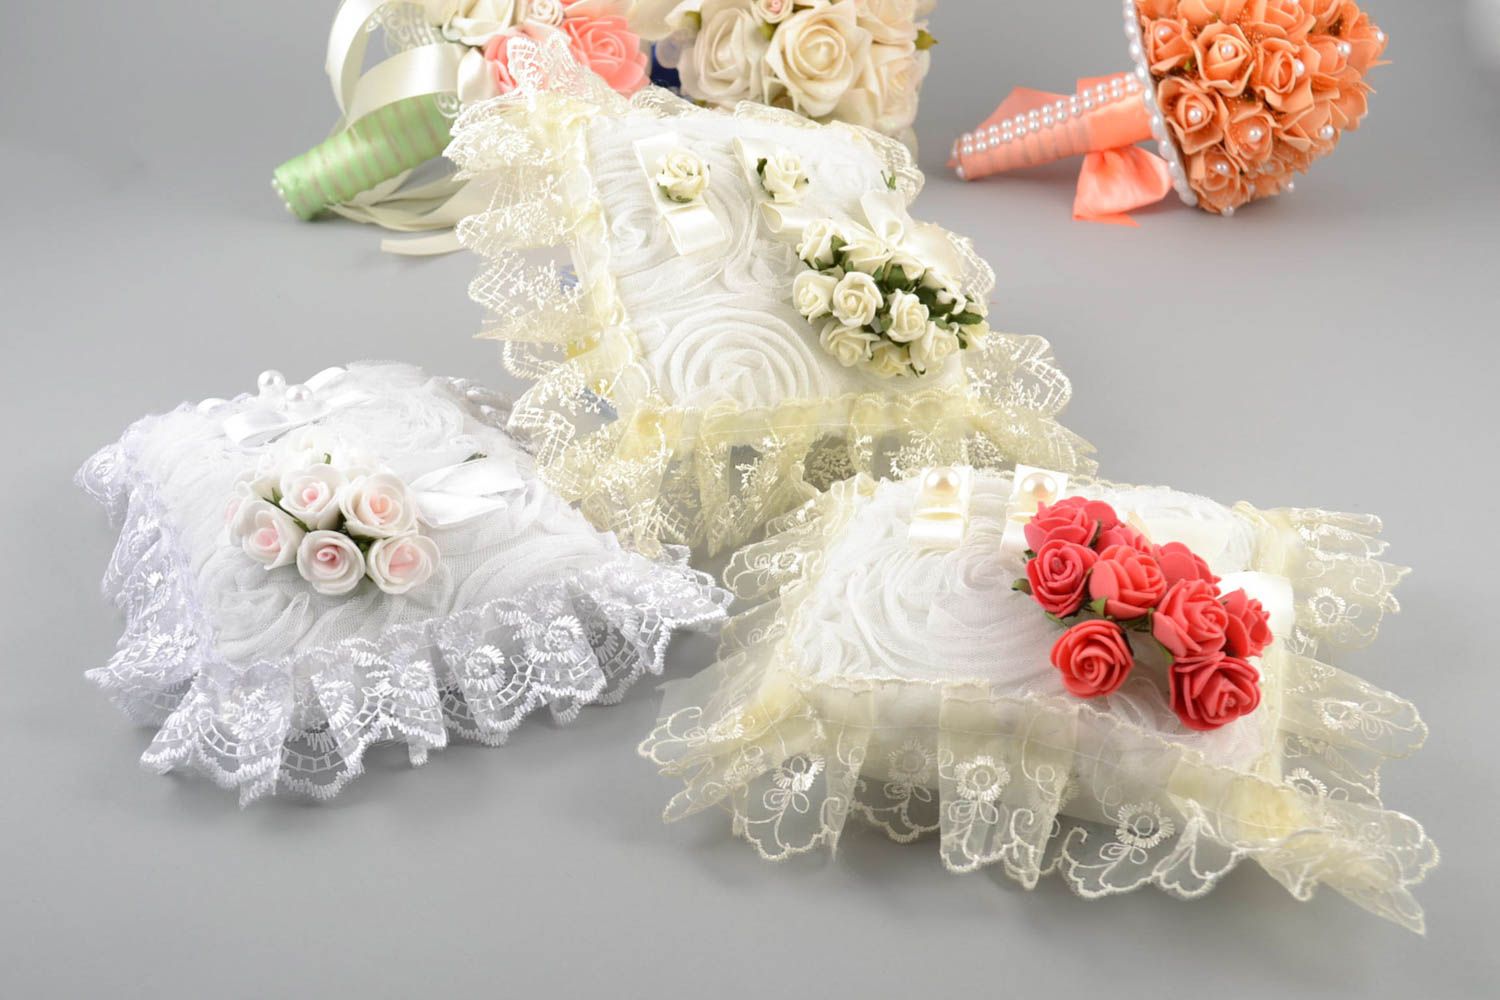 Handmade wedding openwork set of white pillows for rings with flowers 3 pieces photo 1